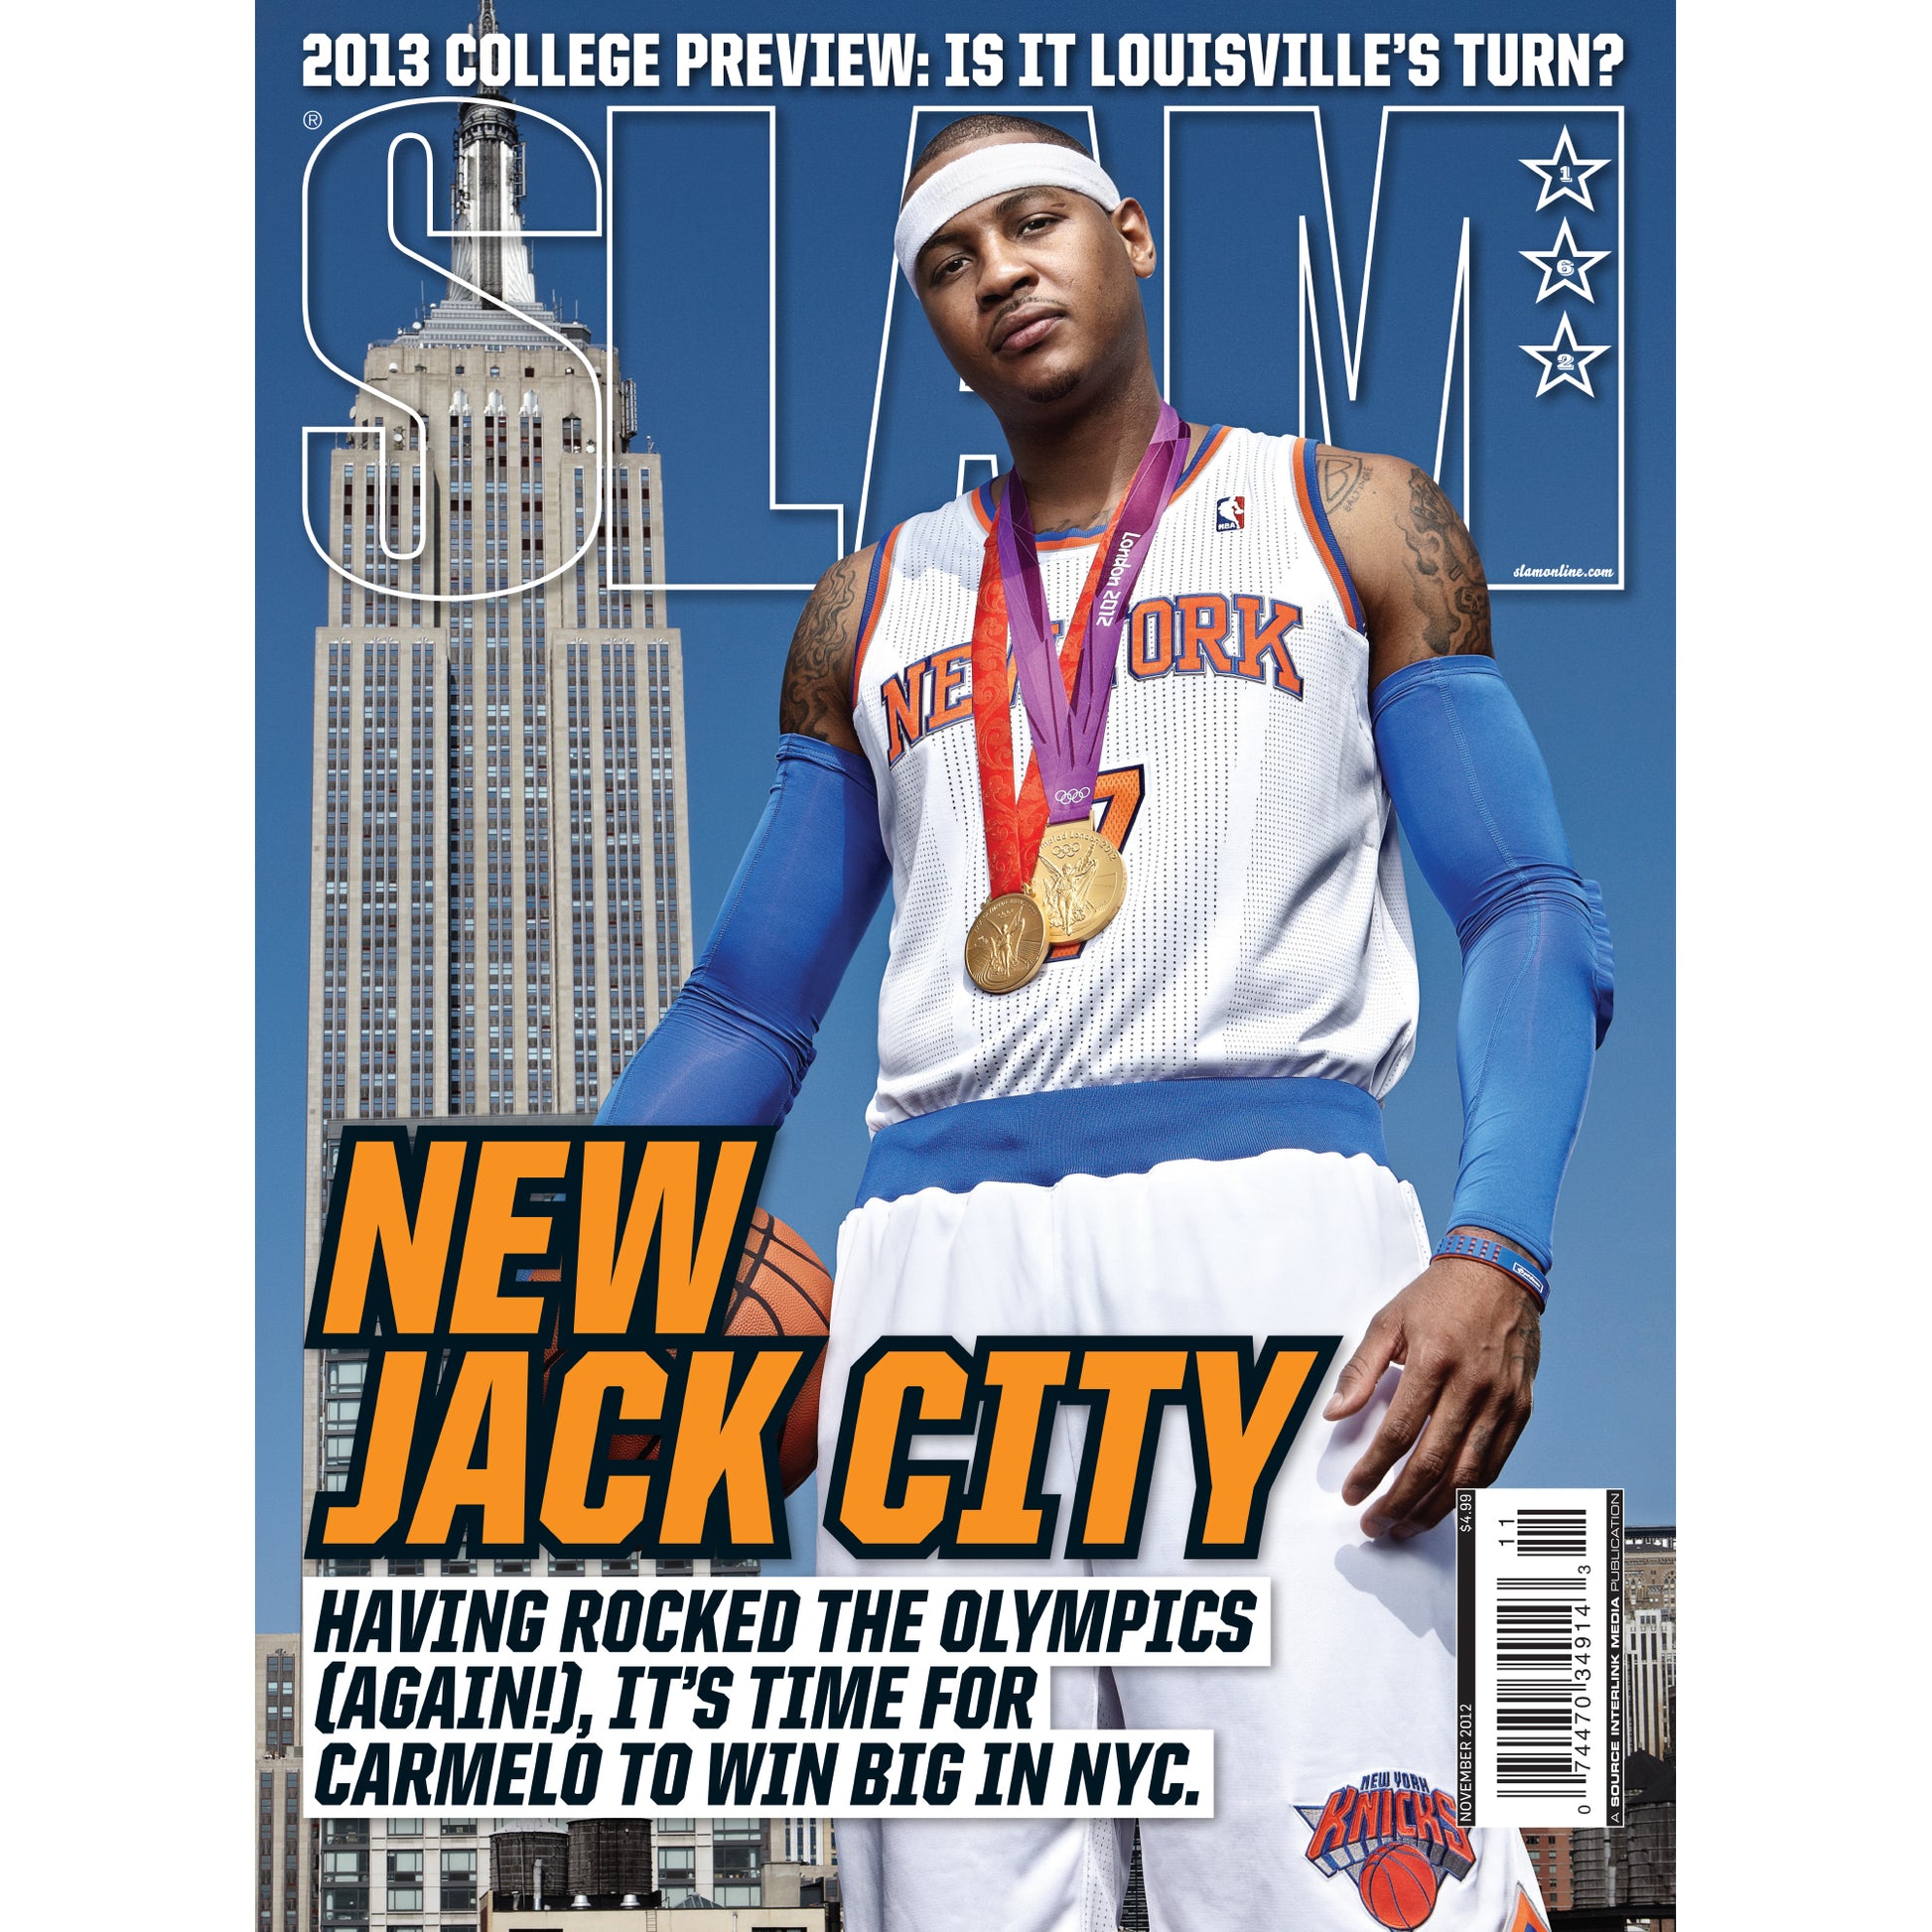 Youth Large New York Knicks Carmelo Anthony Jersey for Sale in